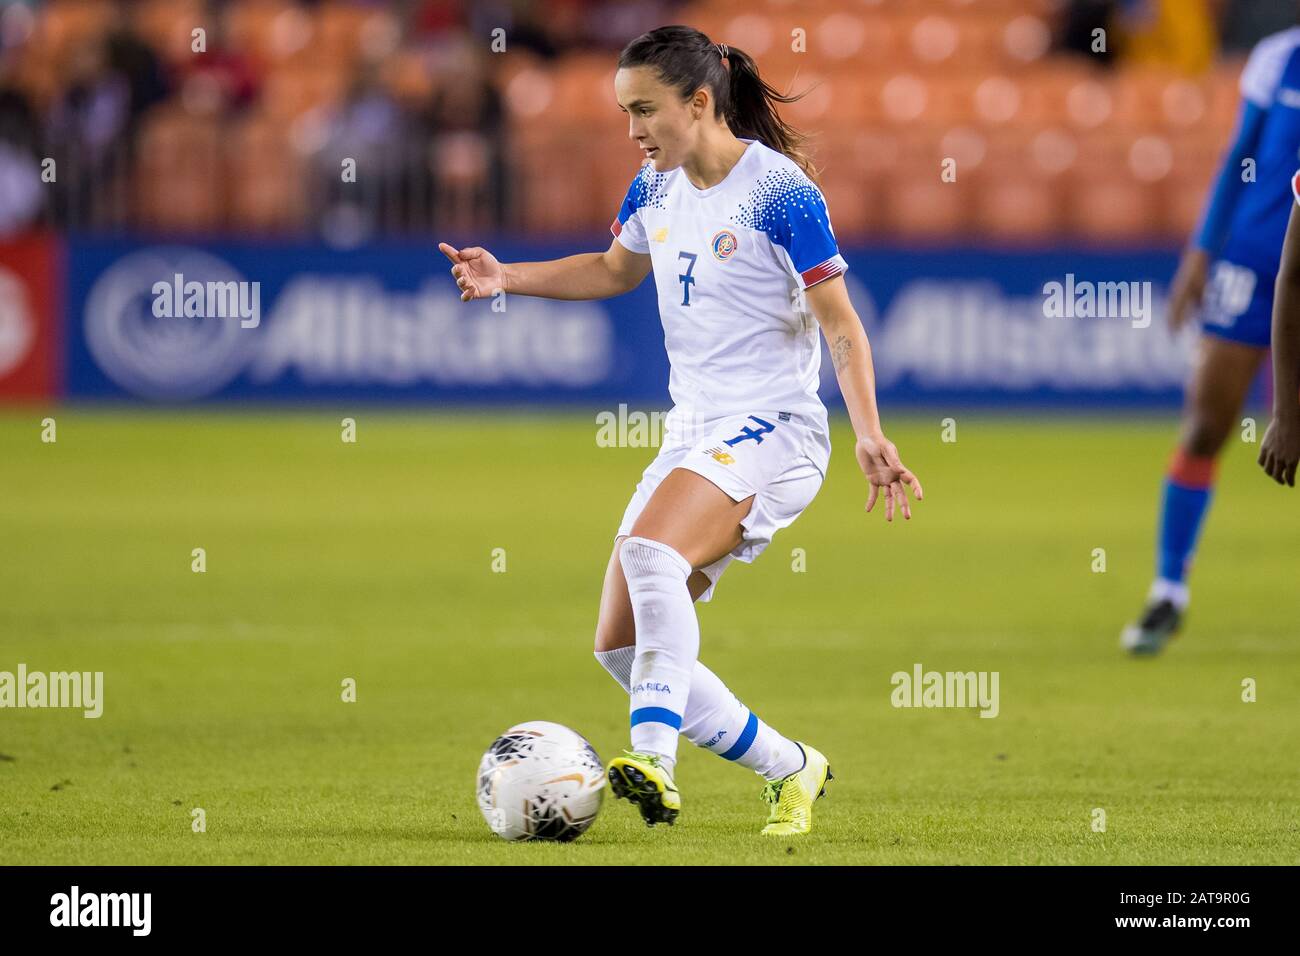 Houston, TX, USA. 31st Jan, 2020. Costa Rica forward Melissa Herrera (7) controls the ball during the 2nd half of a CONCACAF Olympic Qualifying soccer match between Haiti and Costa Rica at BBVA Stadium in Houston, TX. Costa Rica won the game 2 to 0.Trask Smith/CSM/Alamy Live News Stock Photo